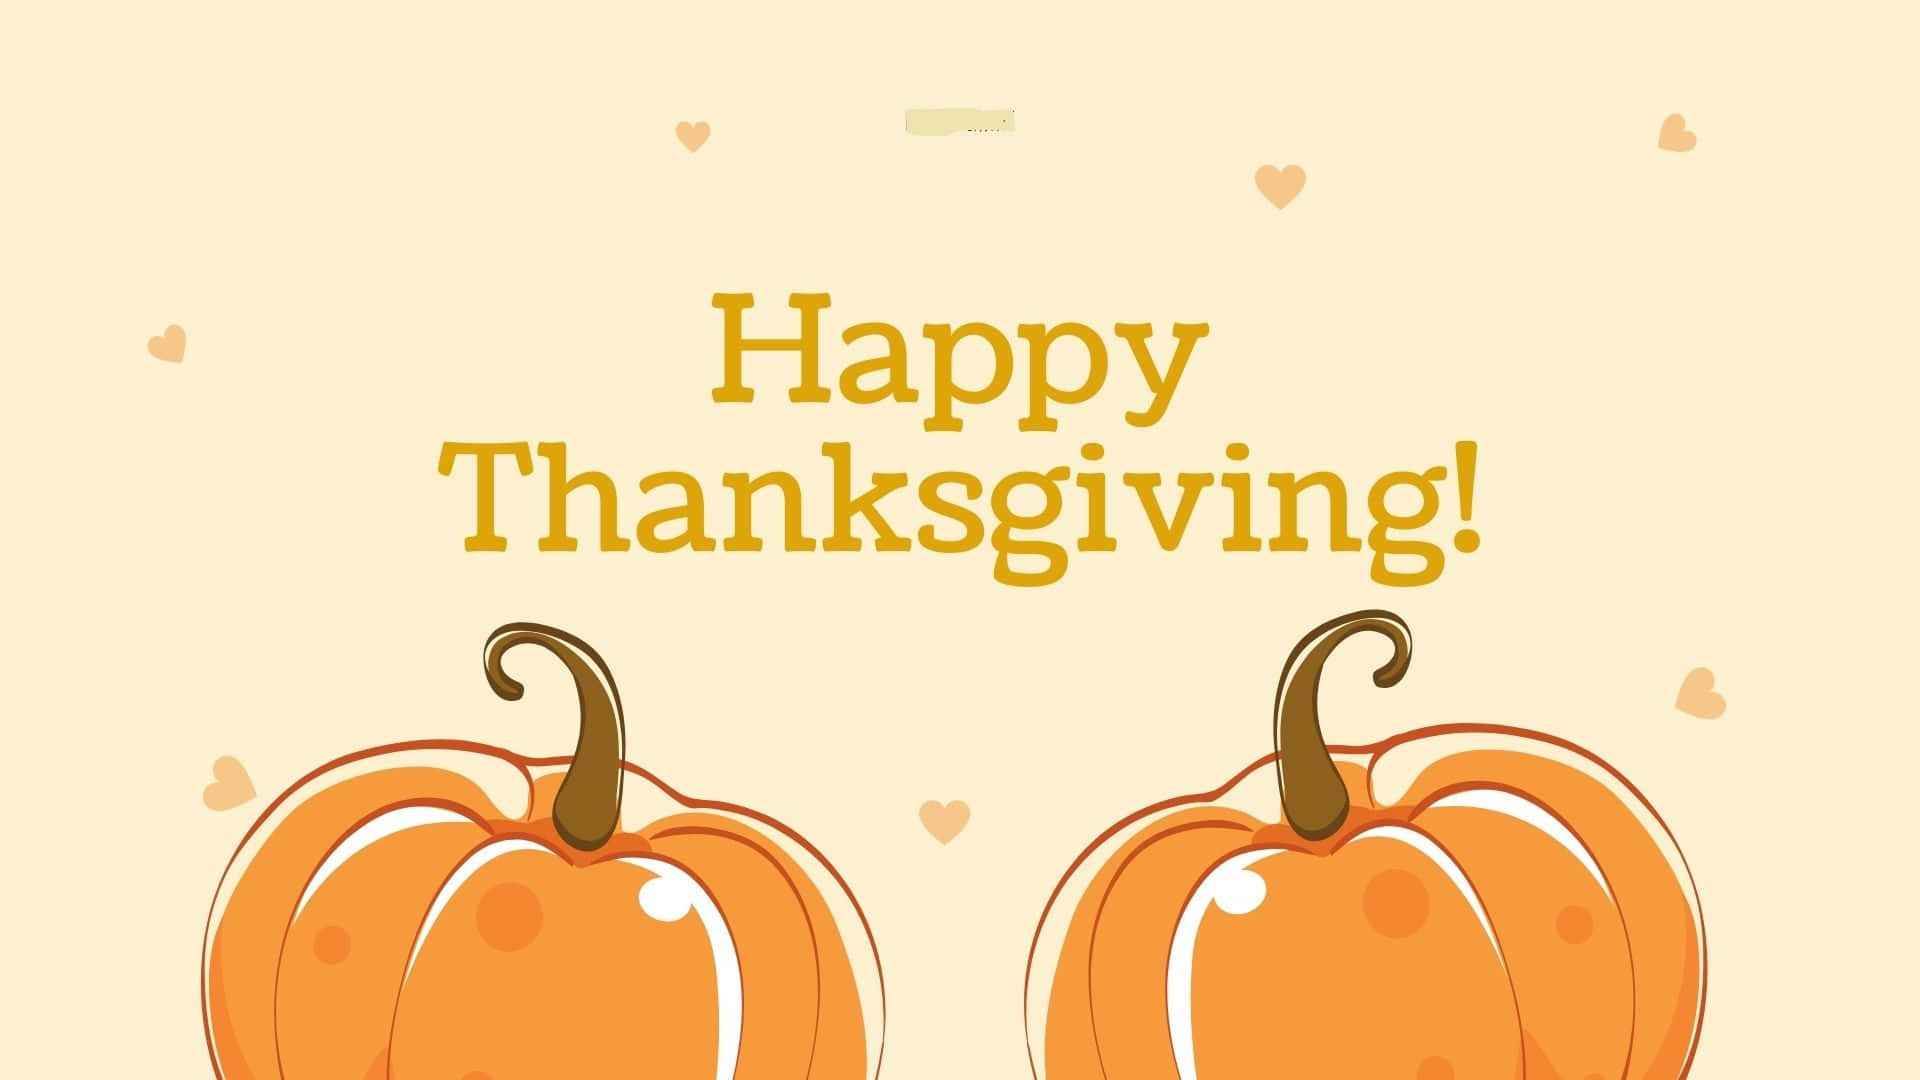 Have a blessed Thanksgiving with family and friends Wallpaper